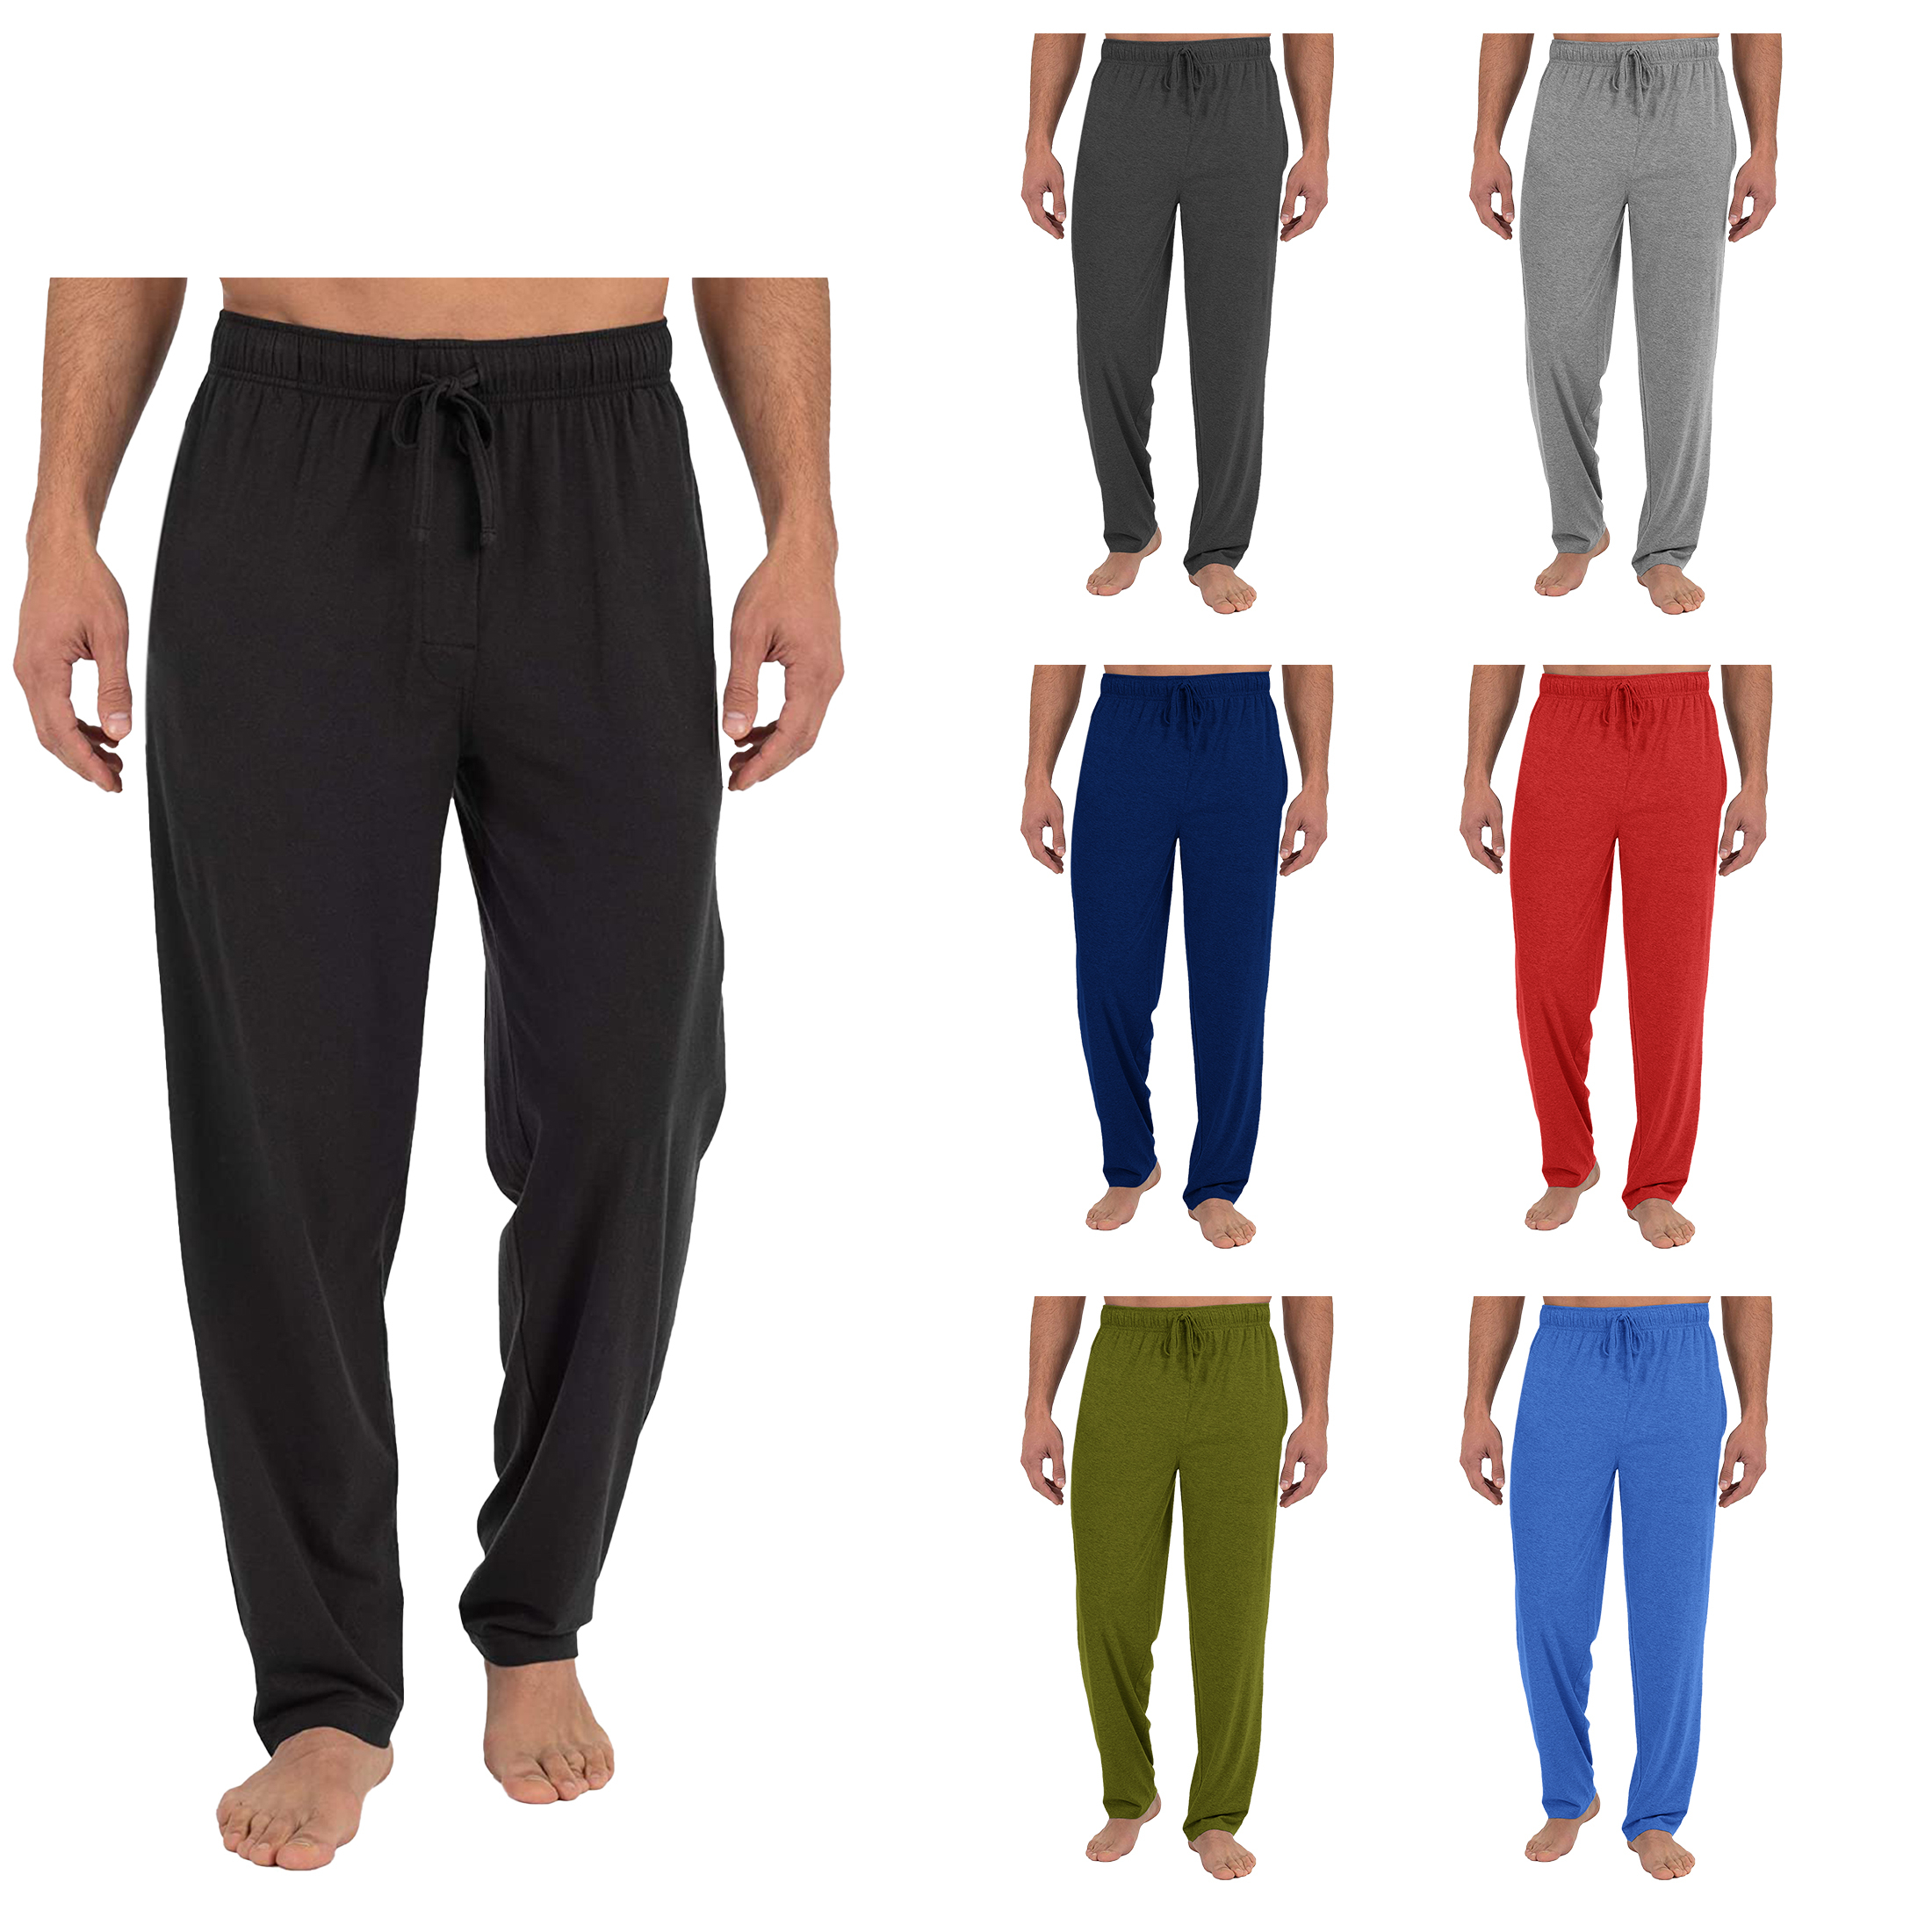 3-Pack Men's Solid Sleep Pajama Pants With Drawstring Jersey Knit Soft Straight-Fit Lounge Trousers - L